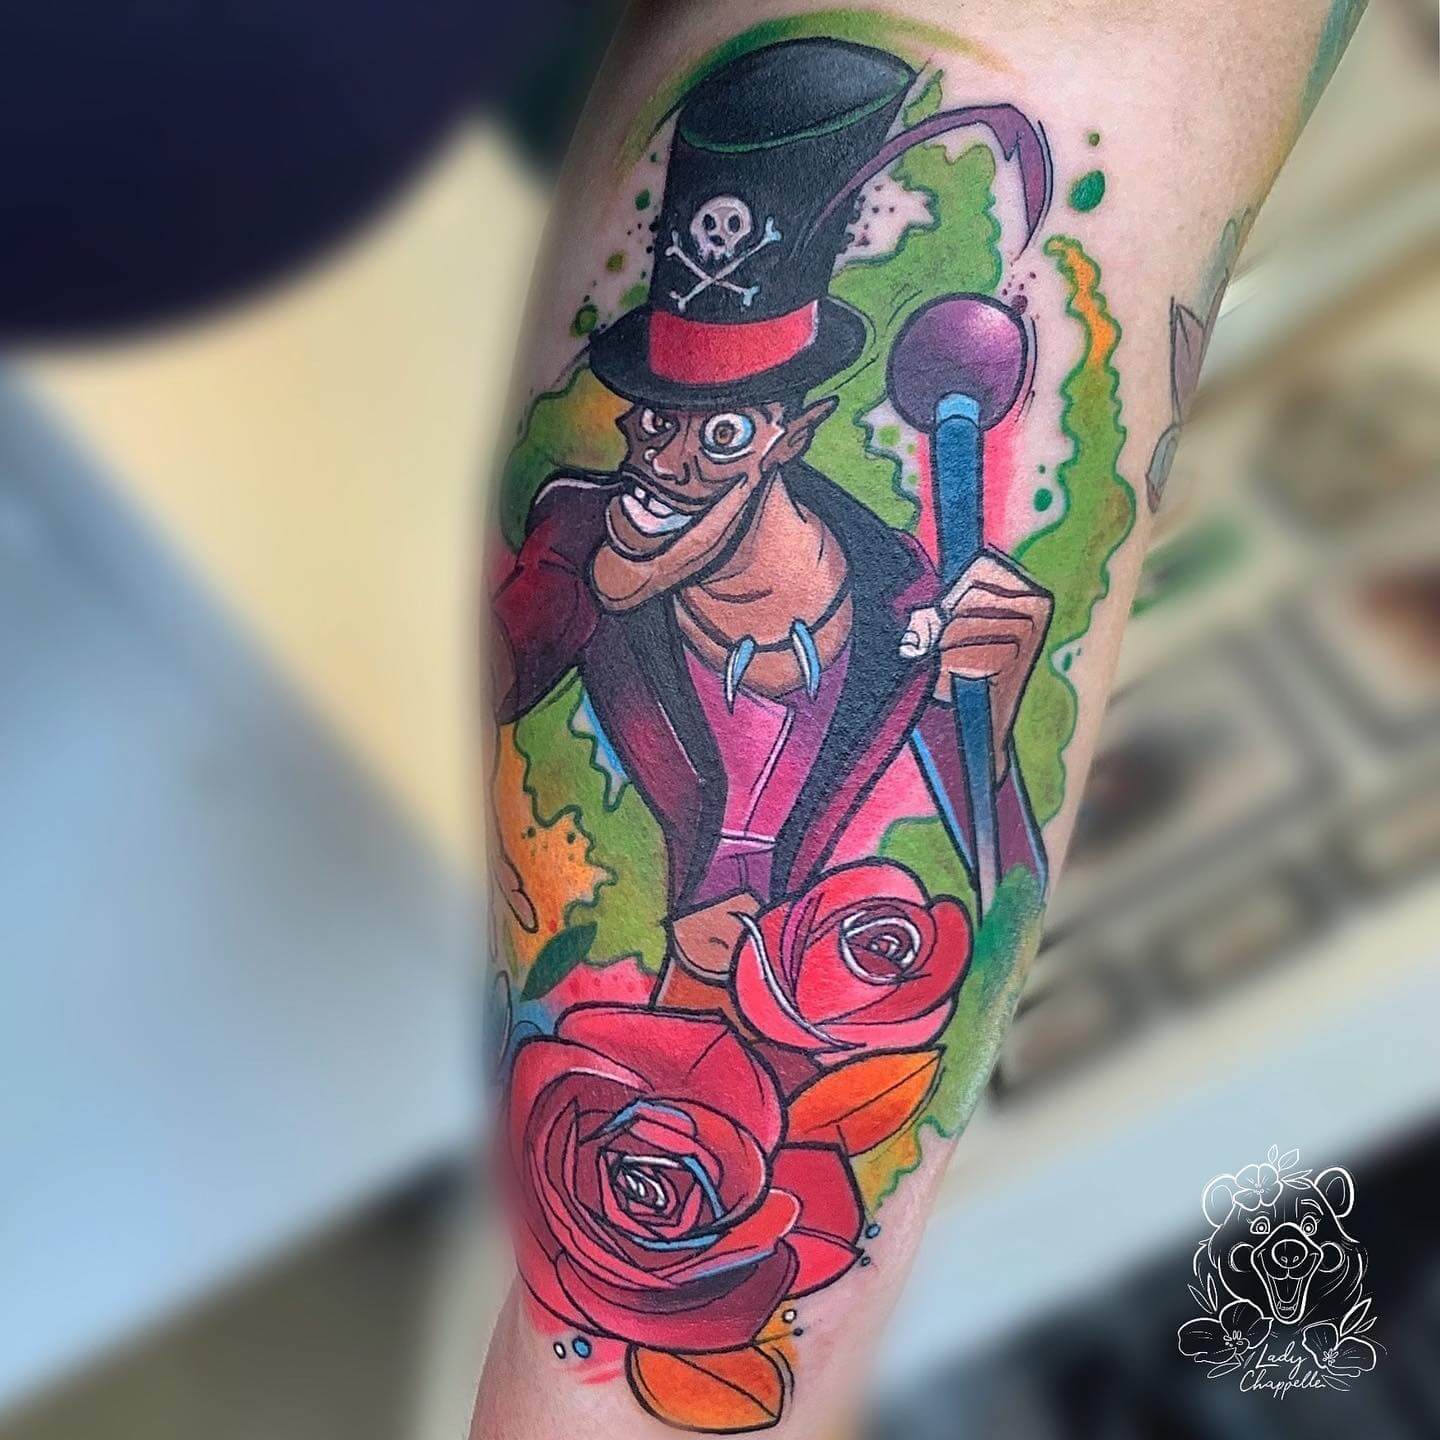 Dr. Facilier tattoo